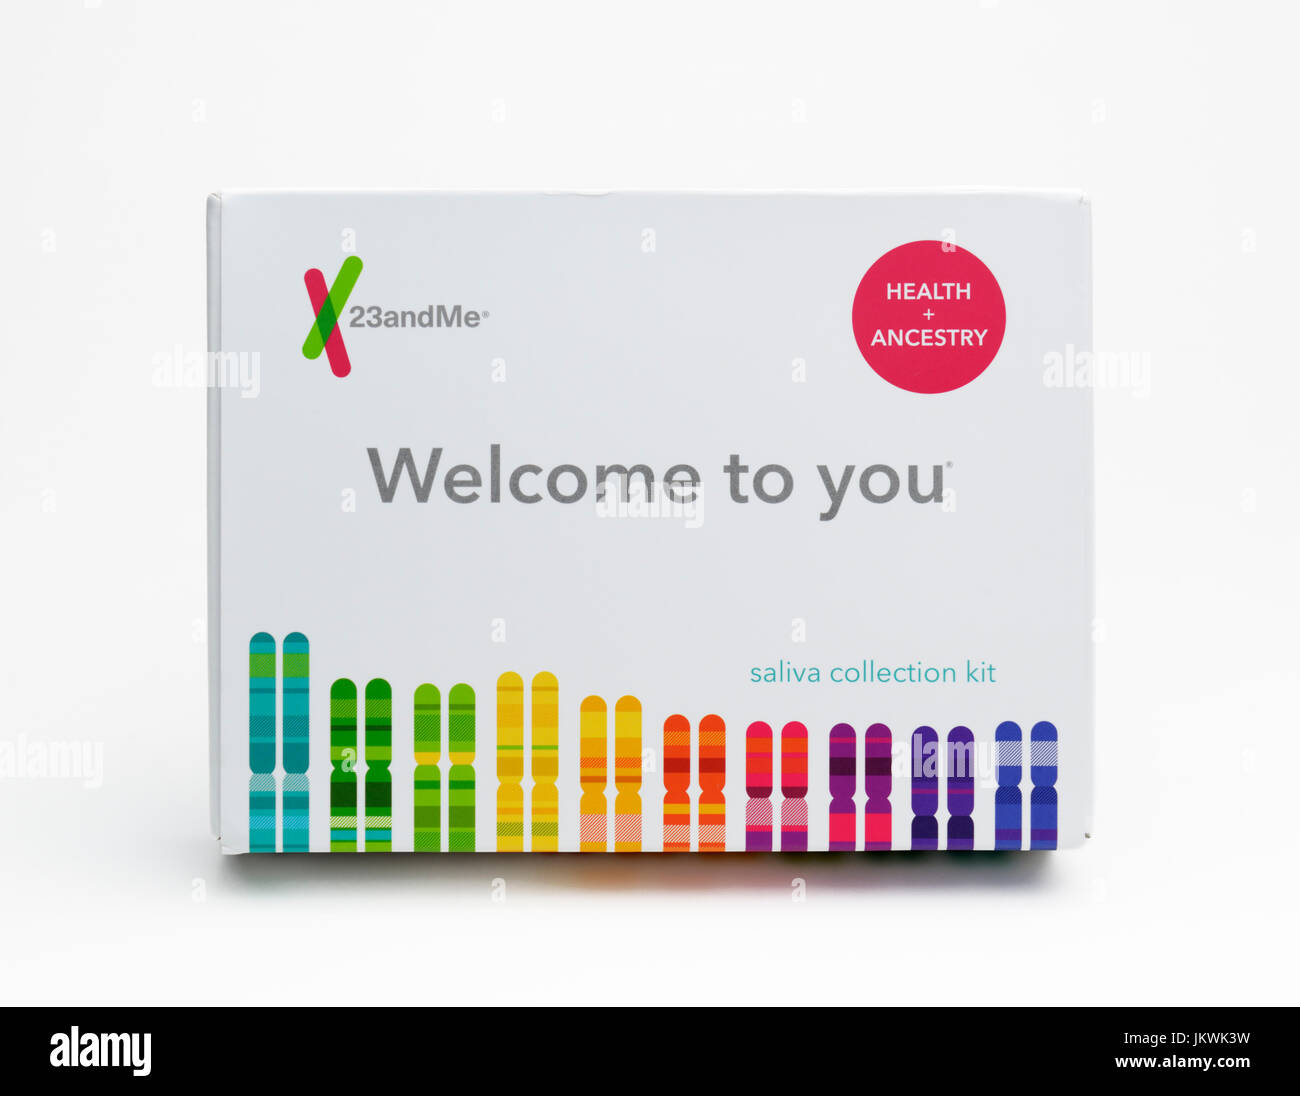 Consume home saliva collecting kit for gene testing of ancestry and health genes Stock Photo